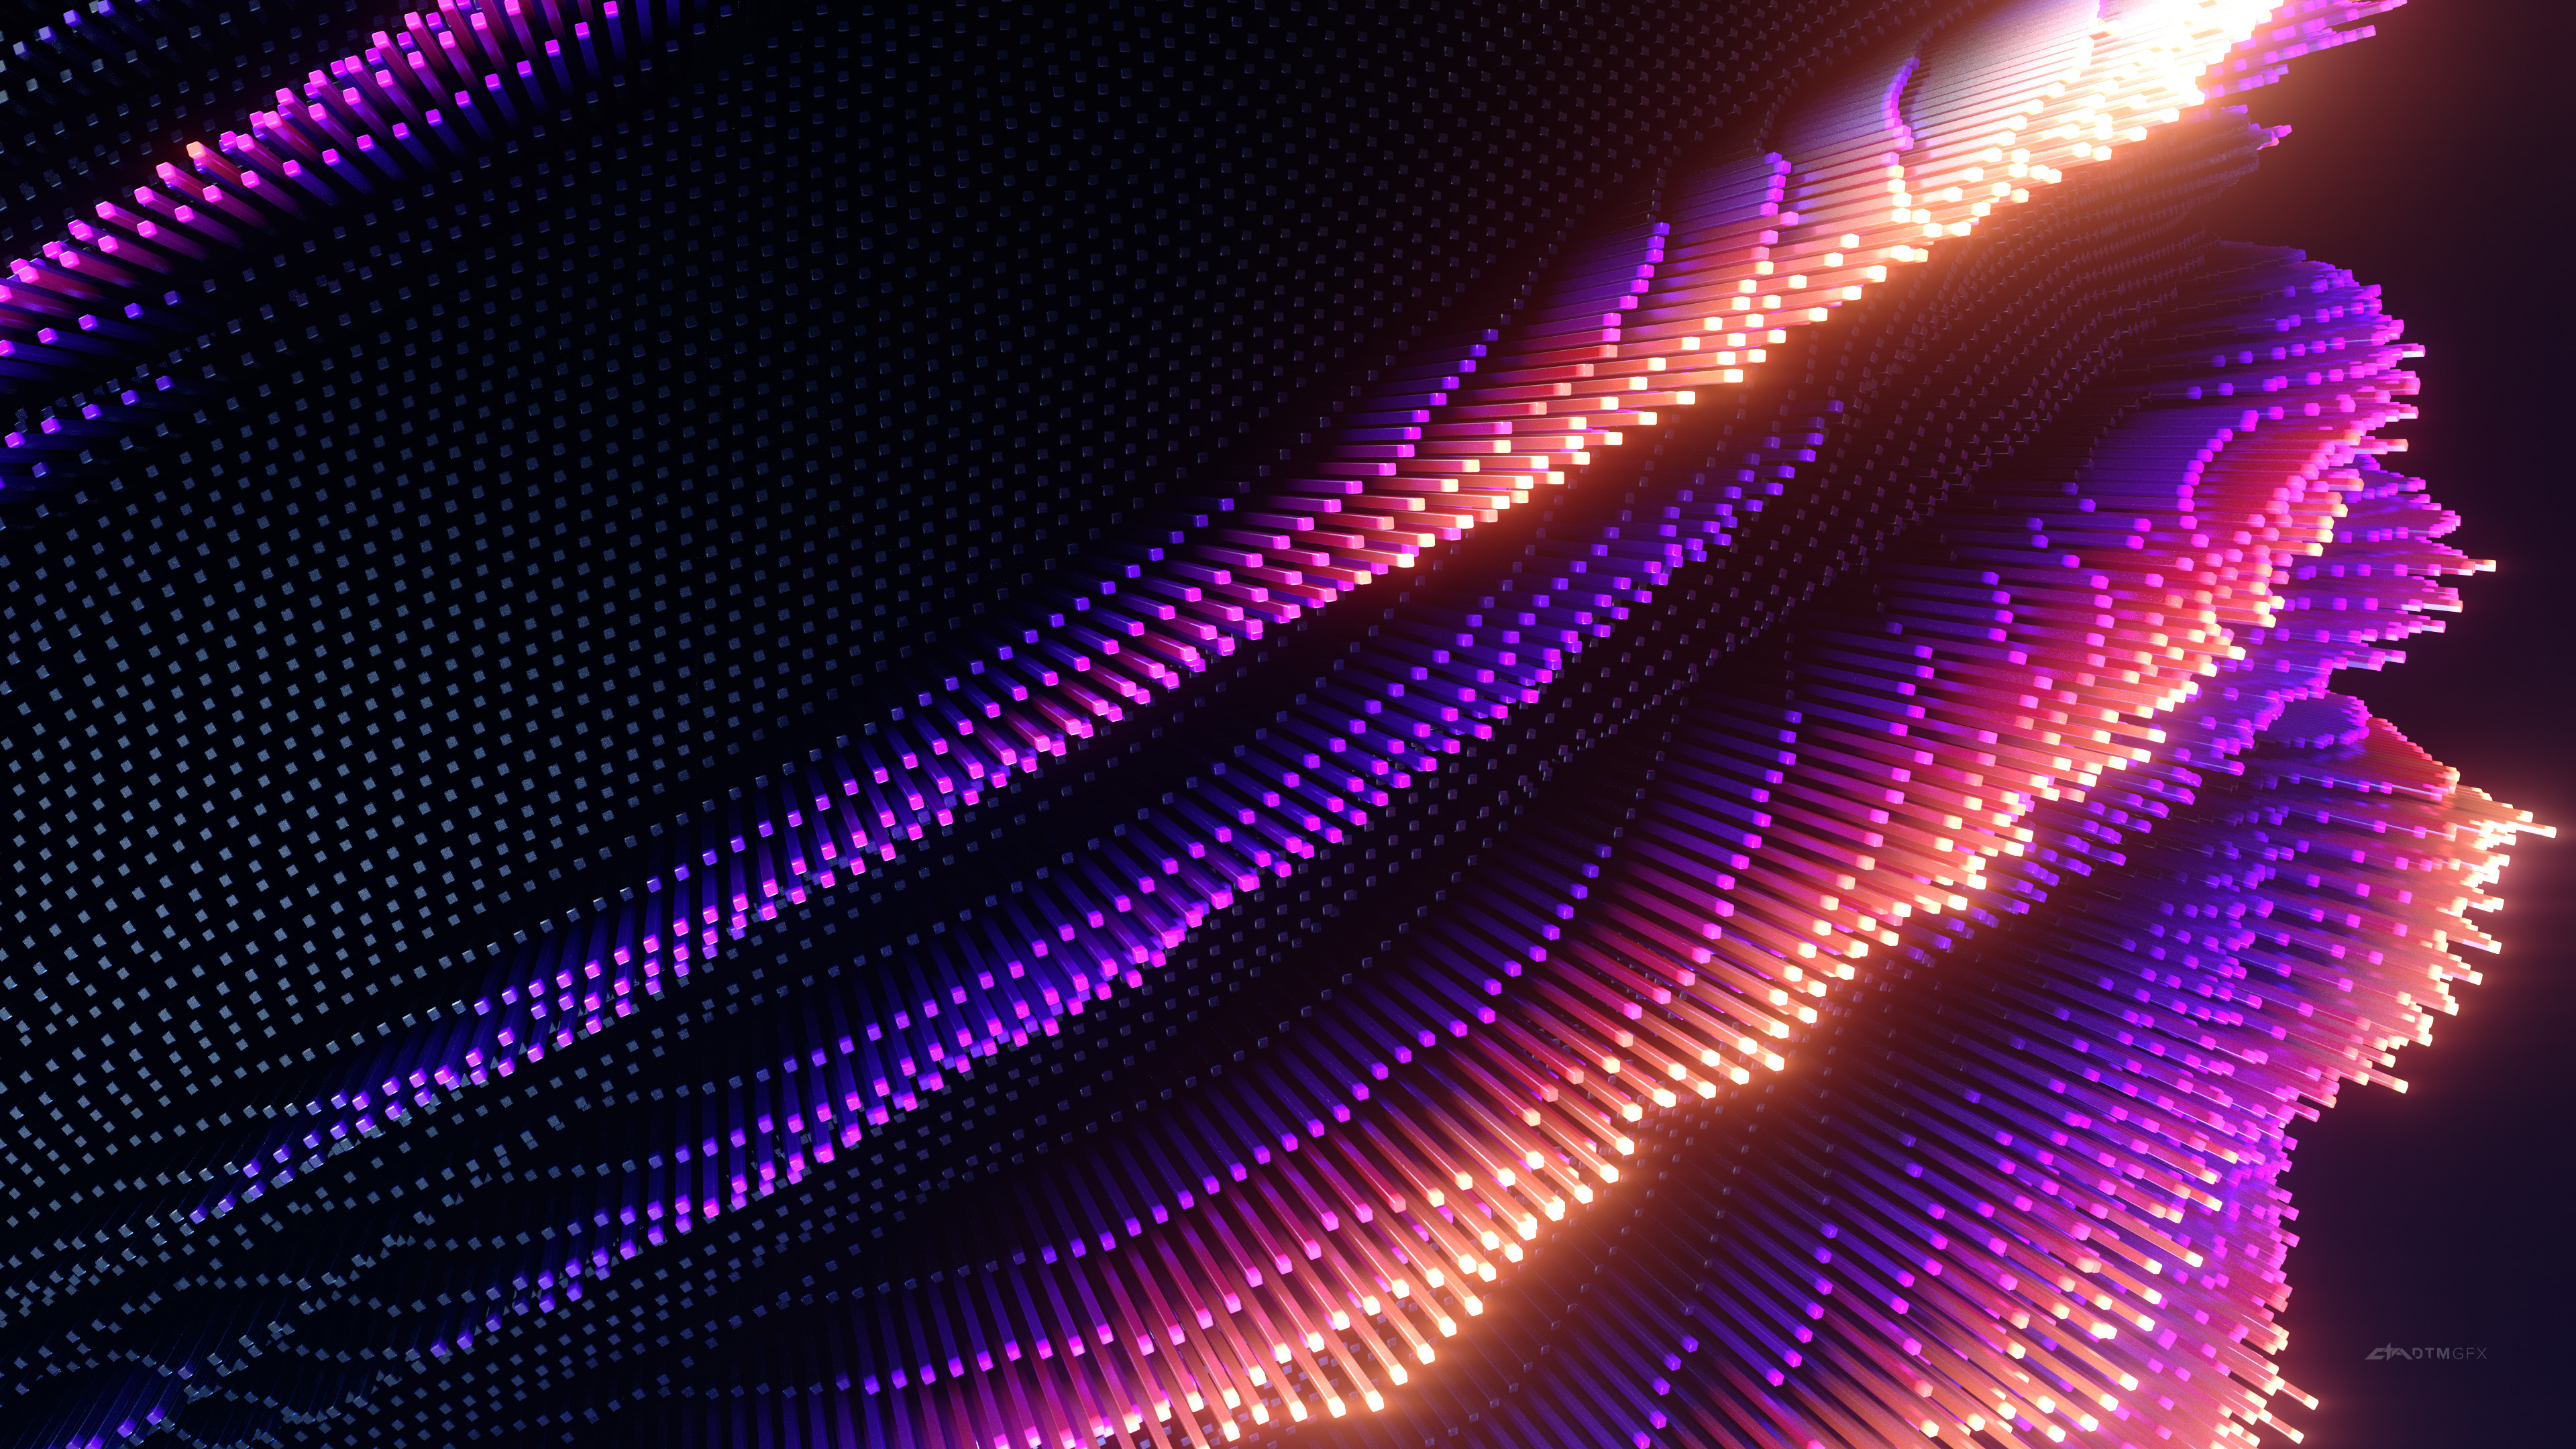 Abstract 3D Abstract Colorful Digital Art Texture Dante Metaphor 3840x2160